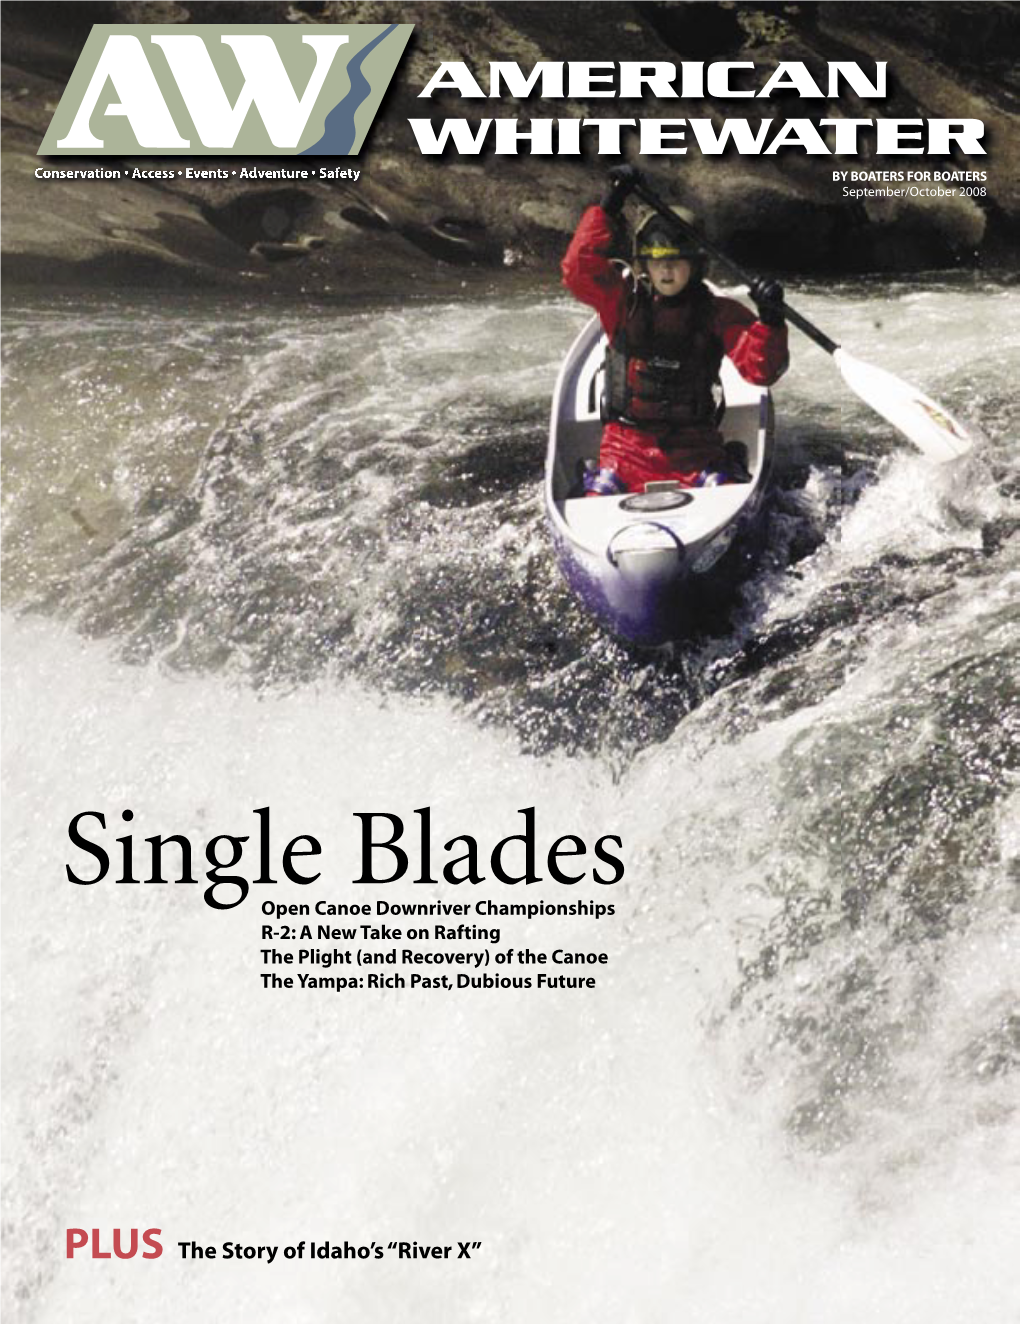 Single Blades Open Canoe Downriver Championships R-2: a New Take on Rafting the Plight (And Recovery) of the Canoe the Yampa: Rich Past, Dubious Future